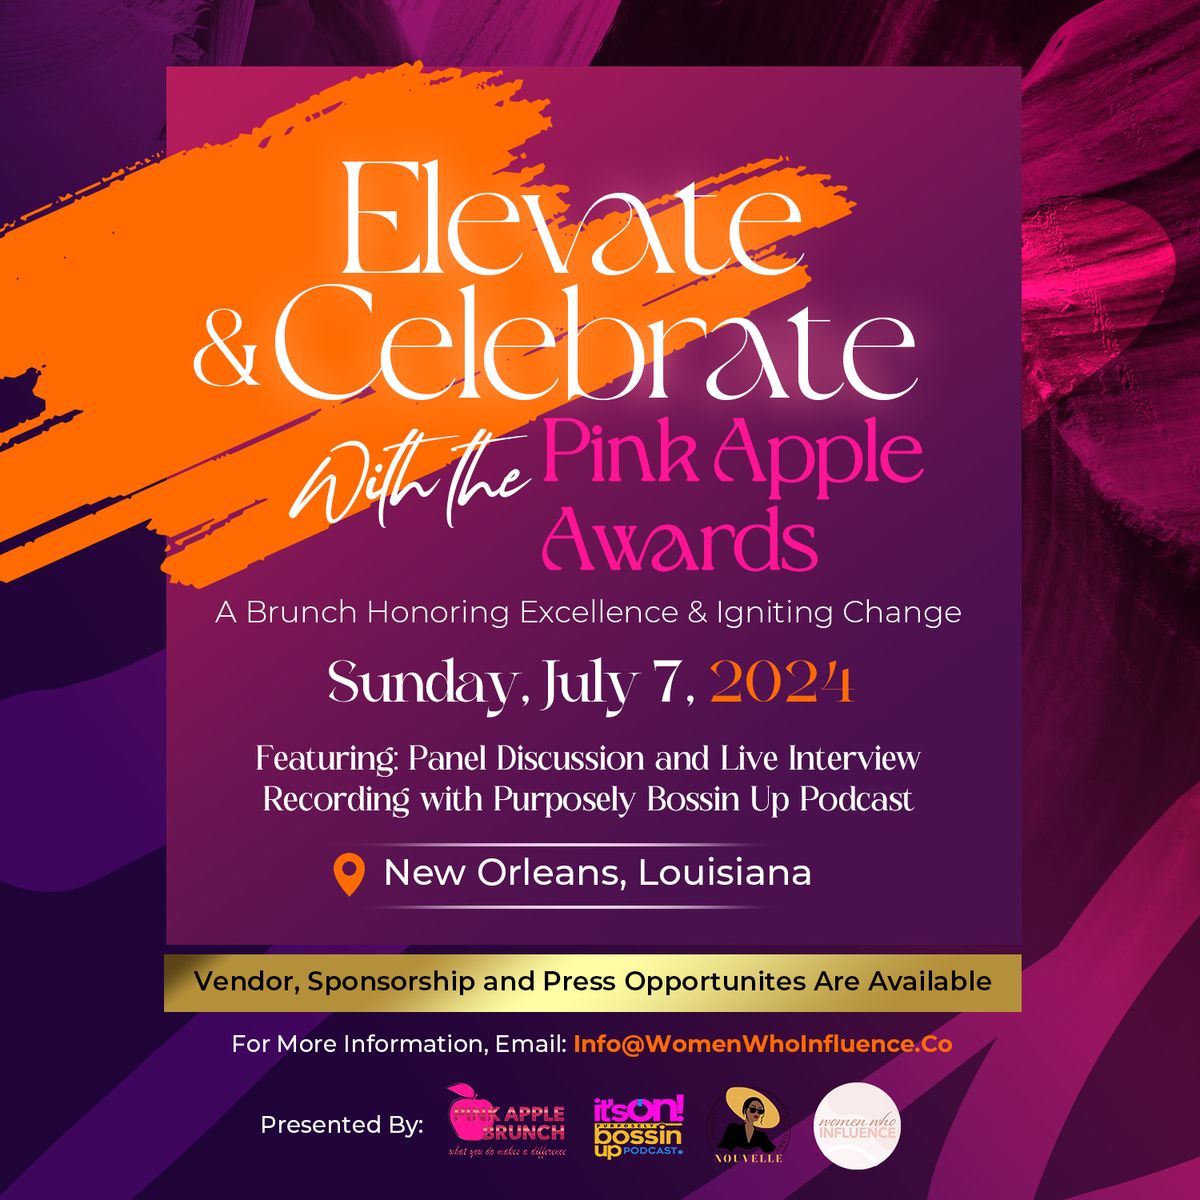 Elevate & Celebrate with the Pink Apple Awards